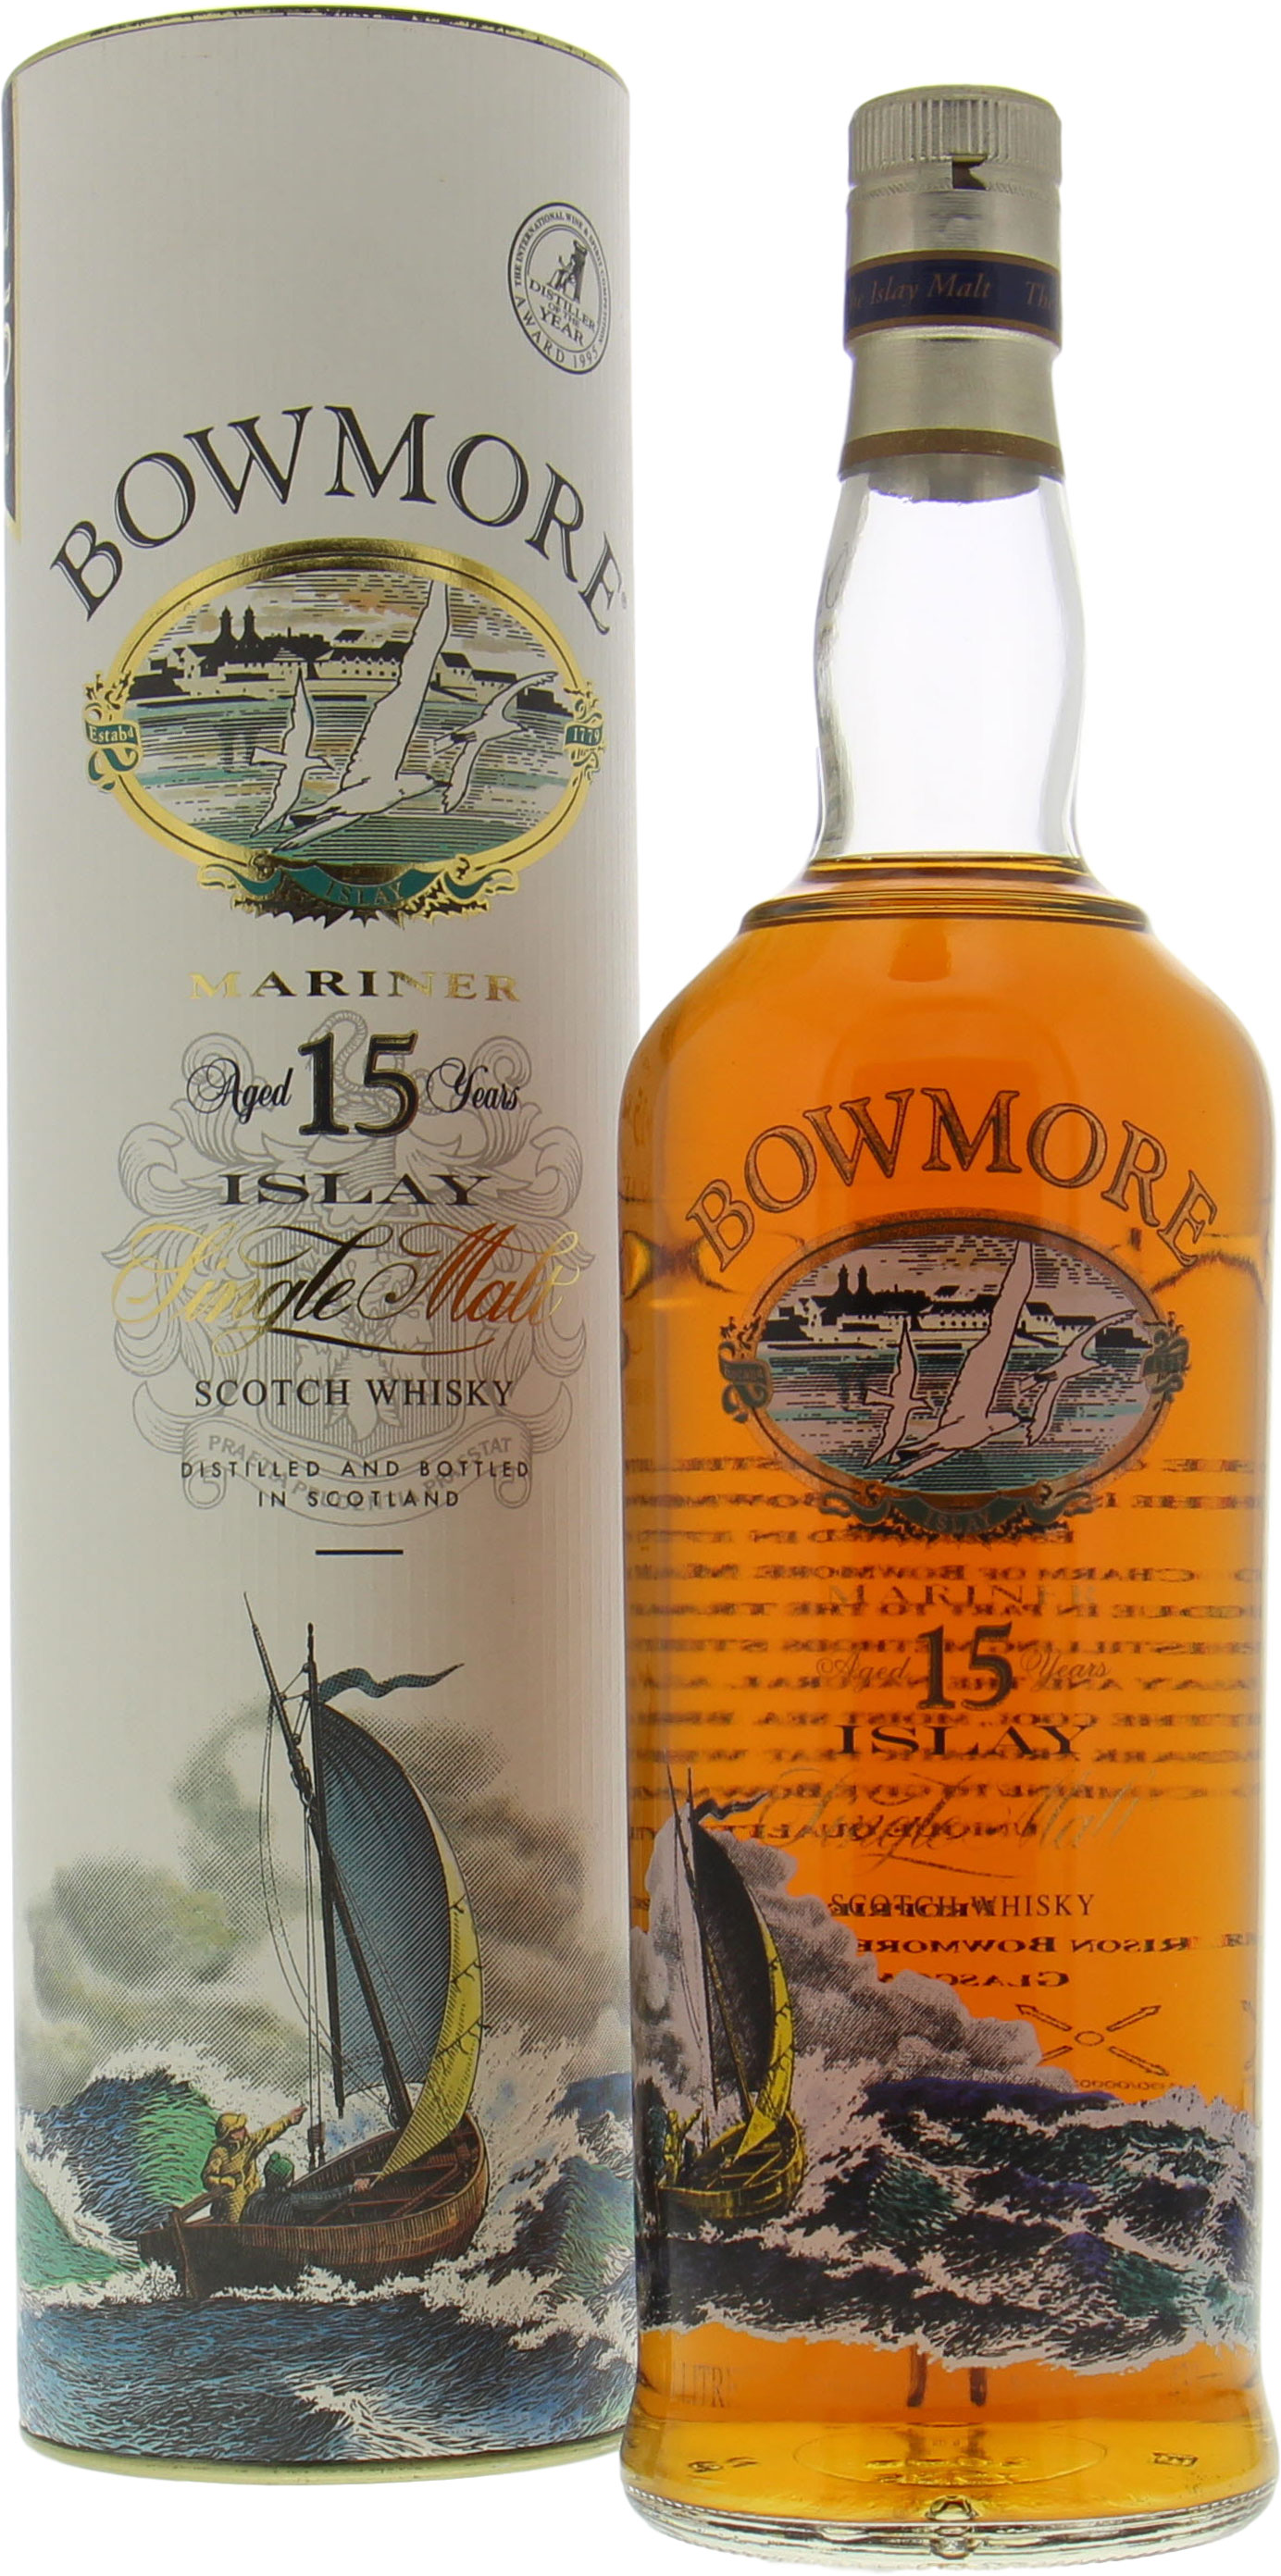 Bowmore - Mariner Glass printed label with gulls and ship 43% NV